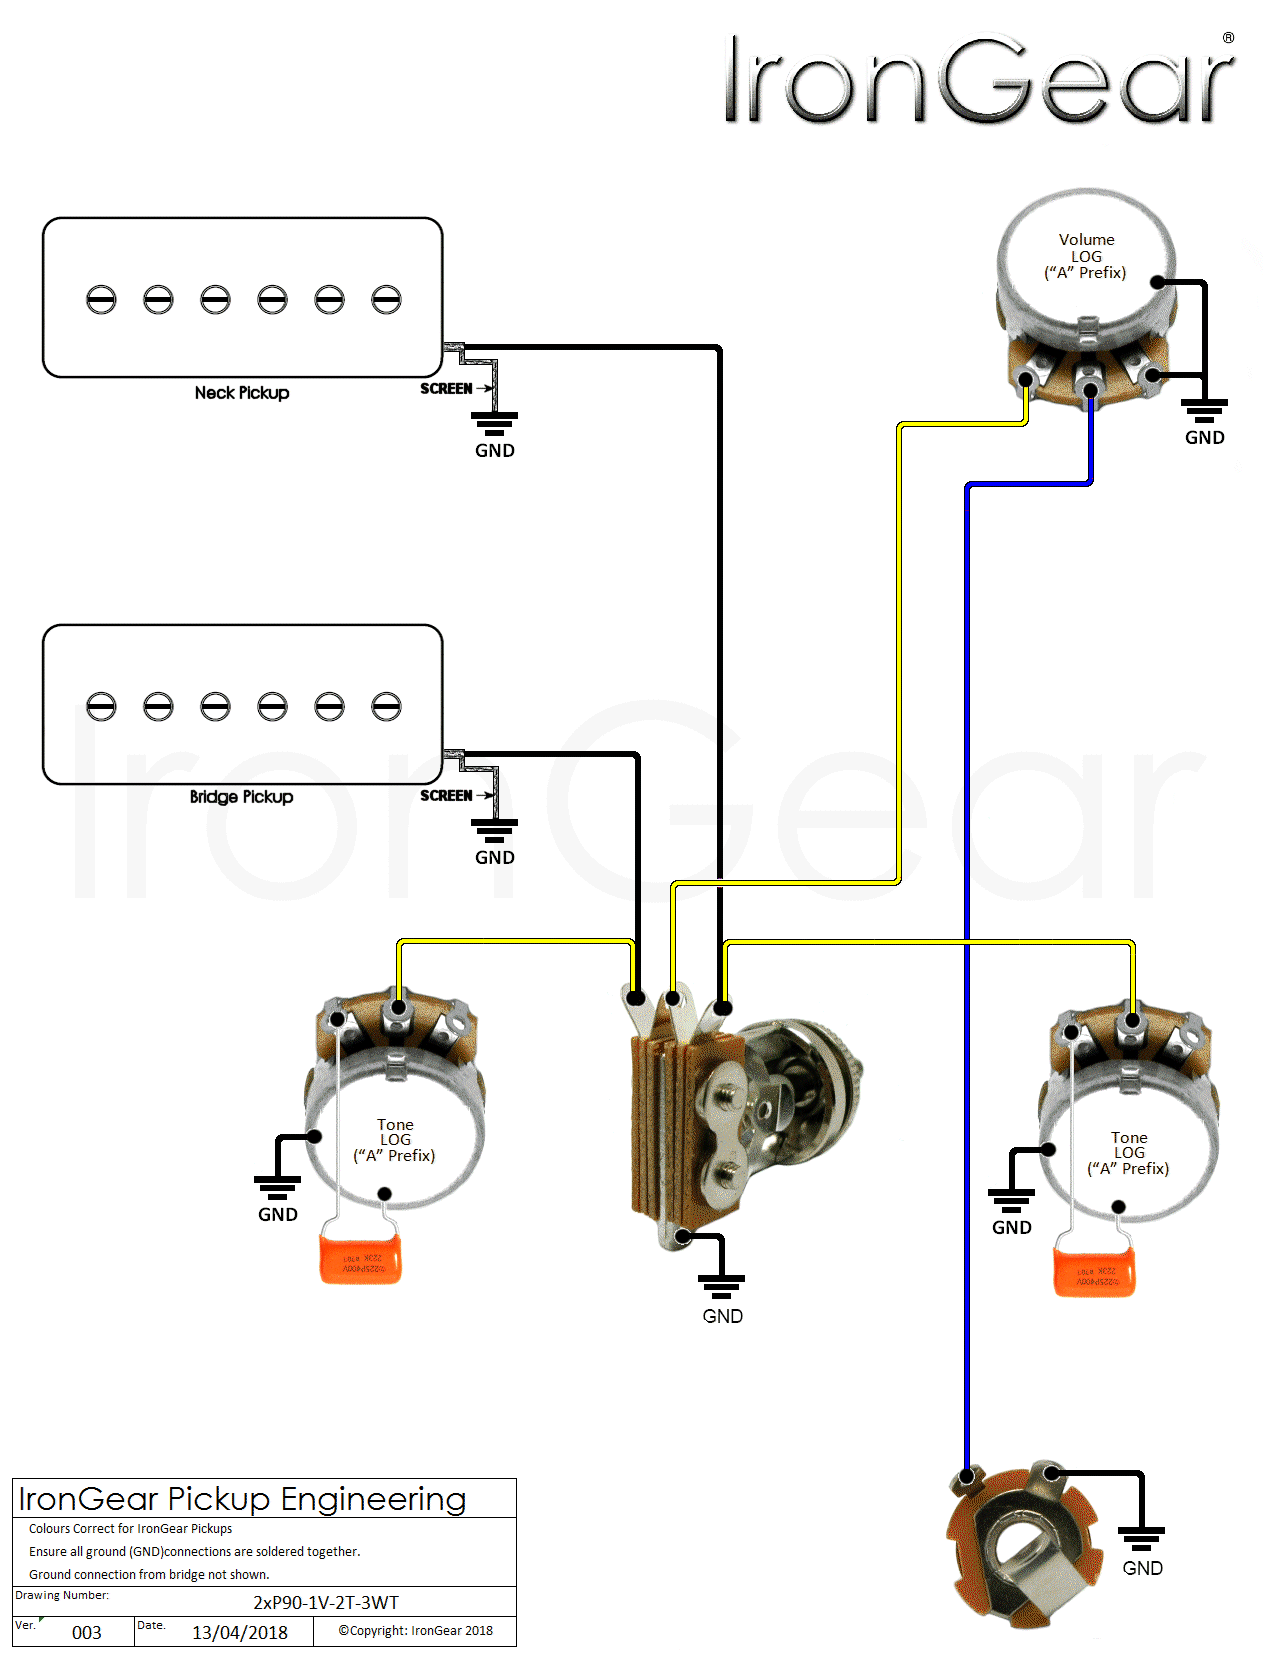 Telecaster Hss Wiring Diagram W/ 3 Way Toggle from www.irongear.co.uk